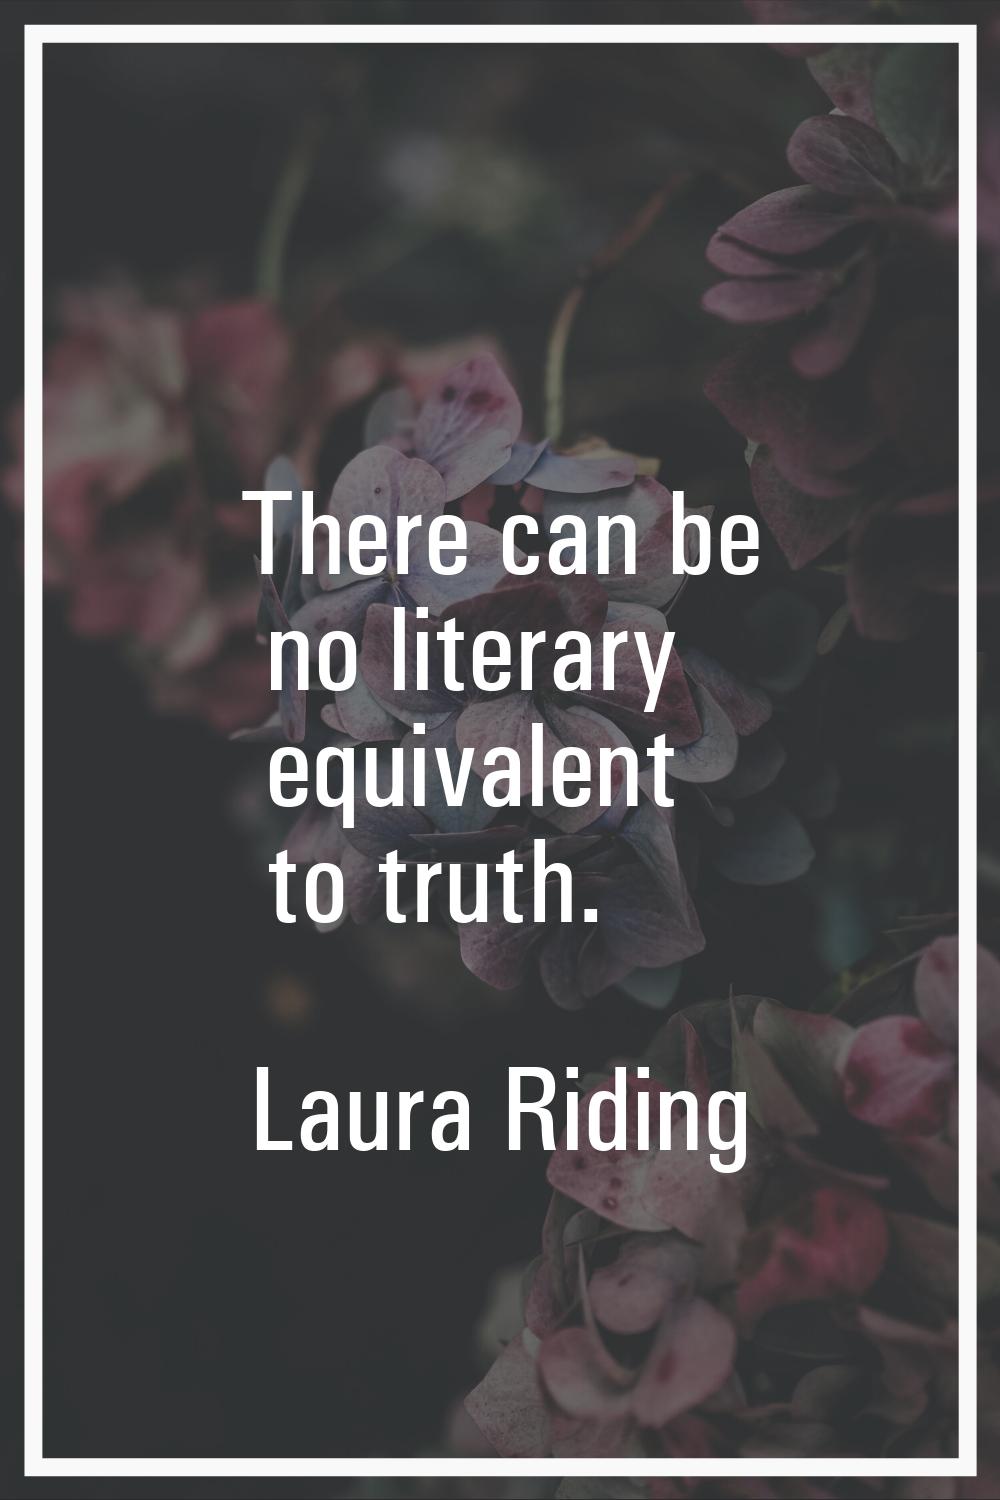 There can be no literary equivalent to truth.